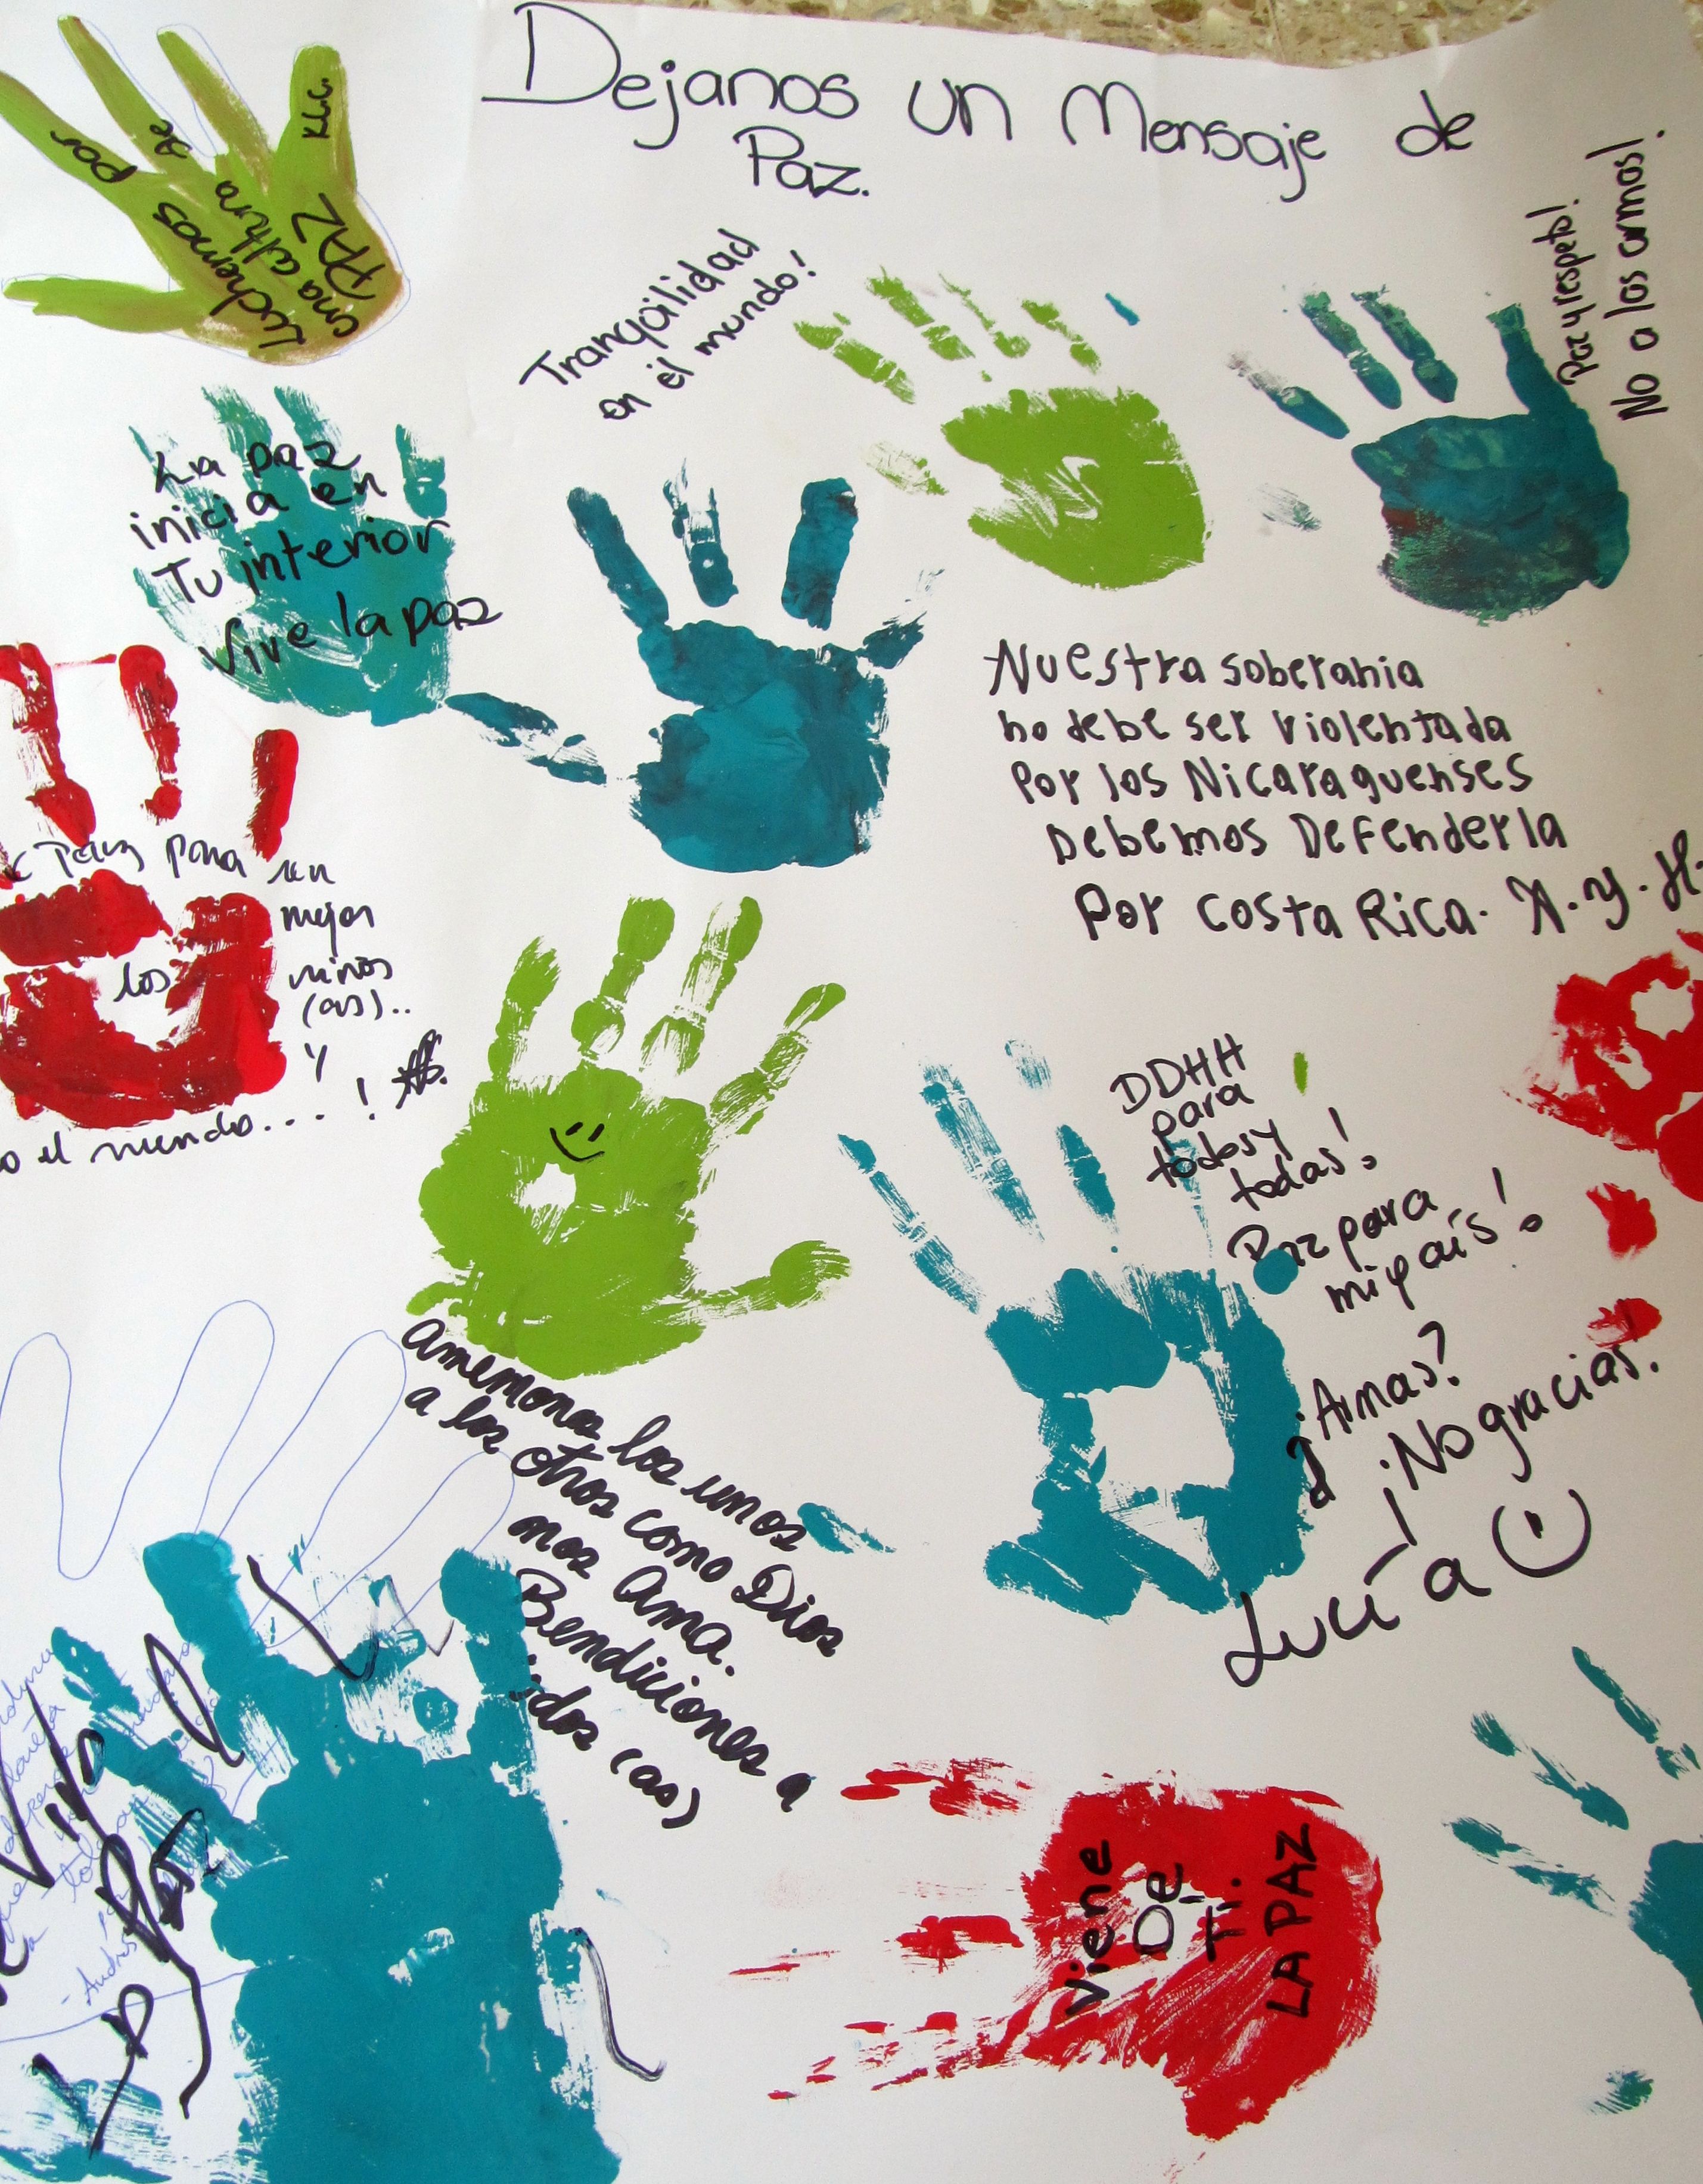 Children were invited to leave their own personal message of peace on a large display provided by the Church of Scientology at the finale of “10 Days for Peace and Human Rights” September 21, 2013.